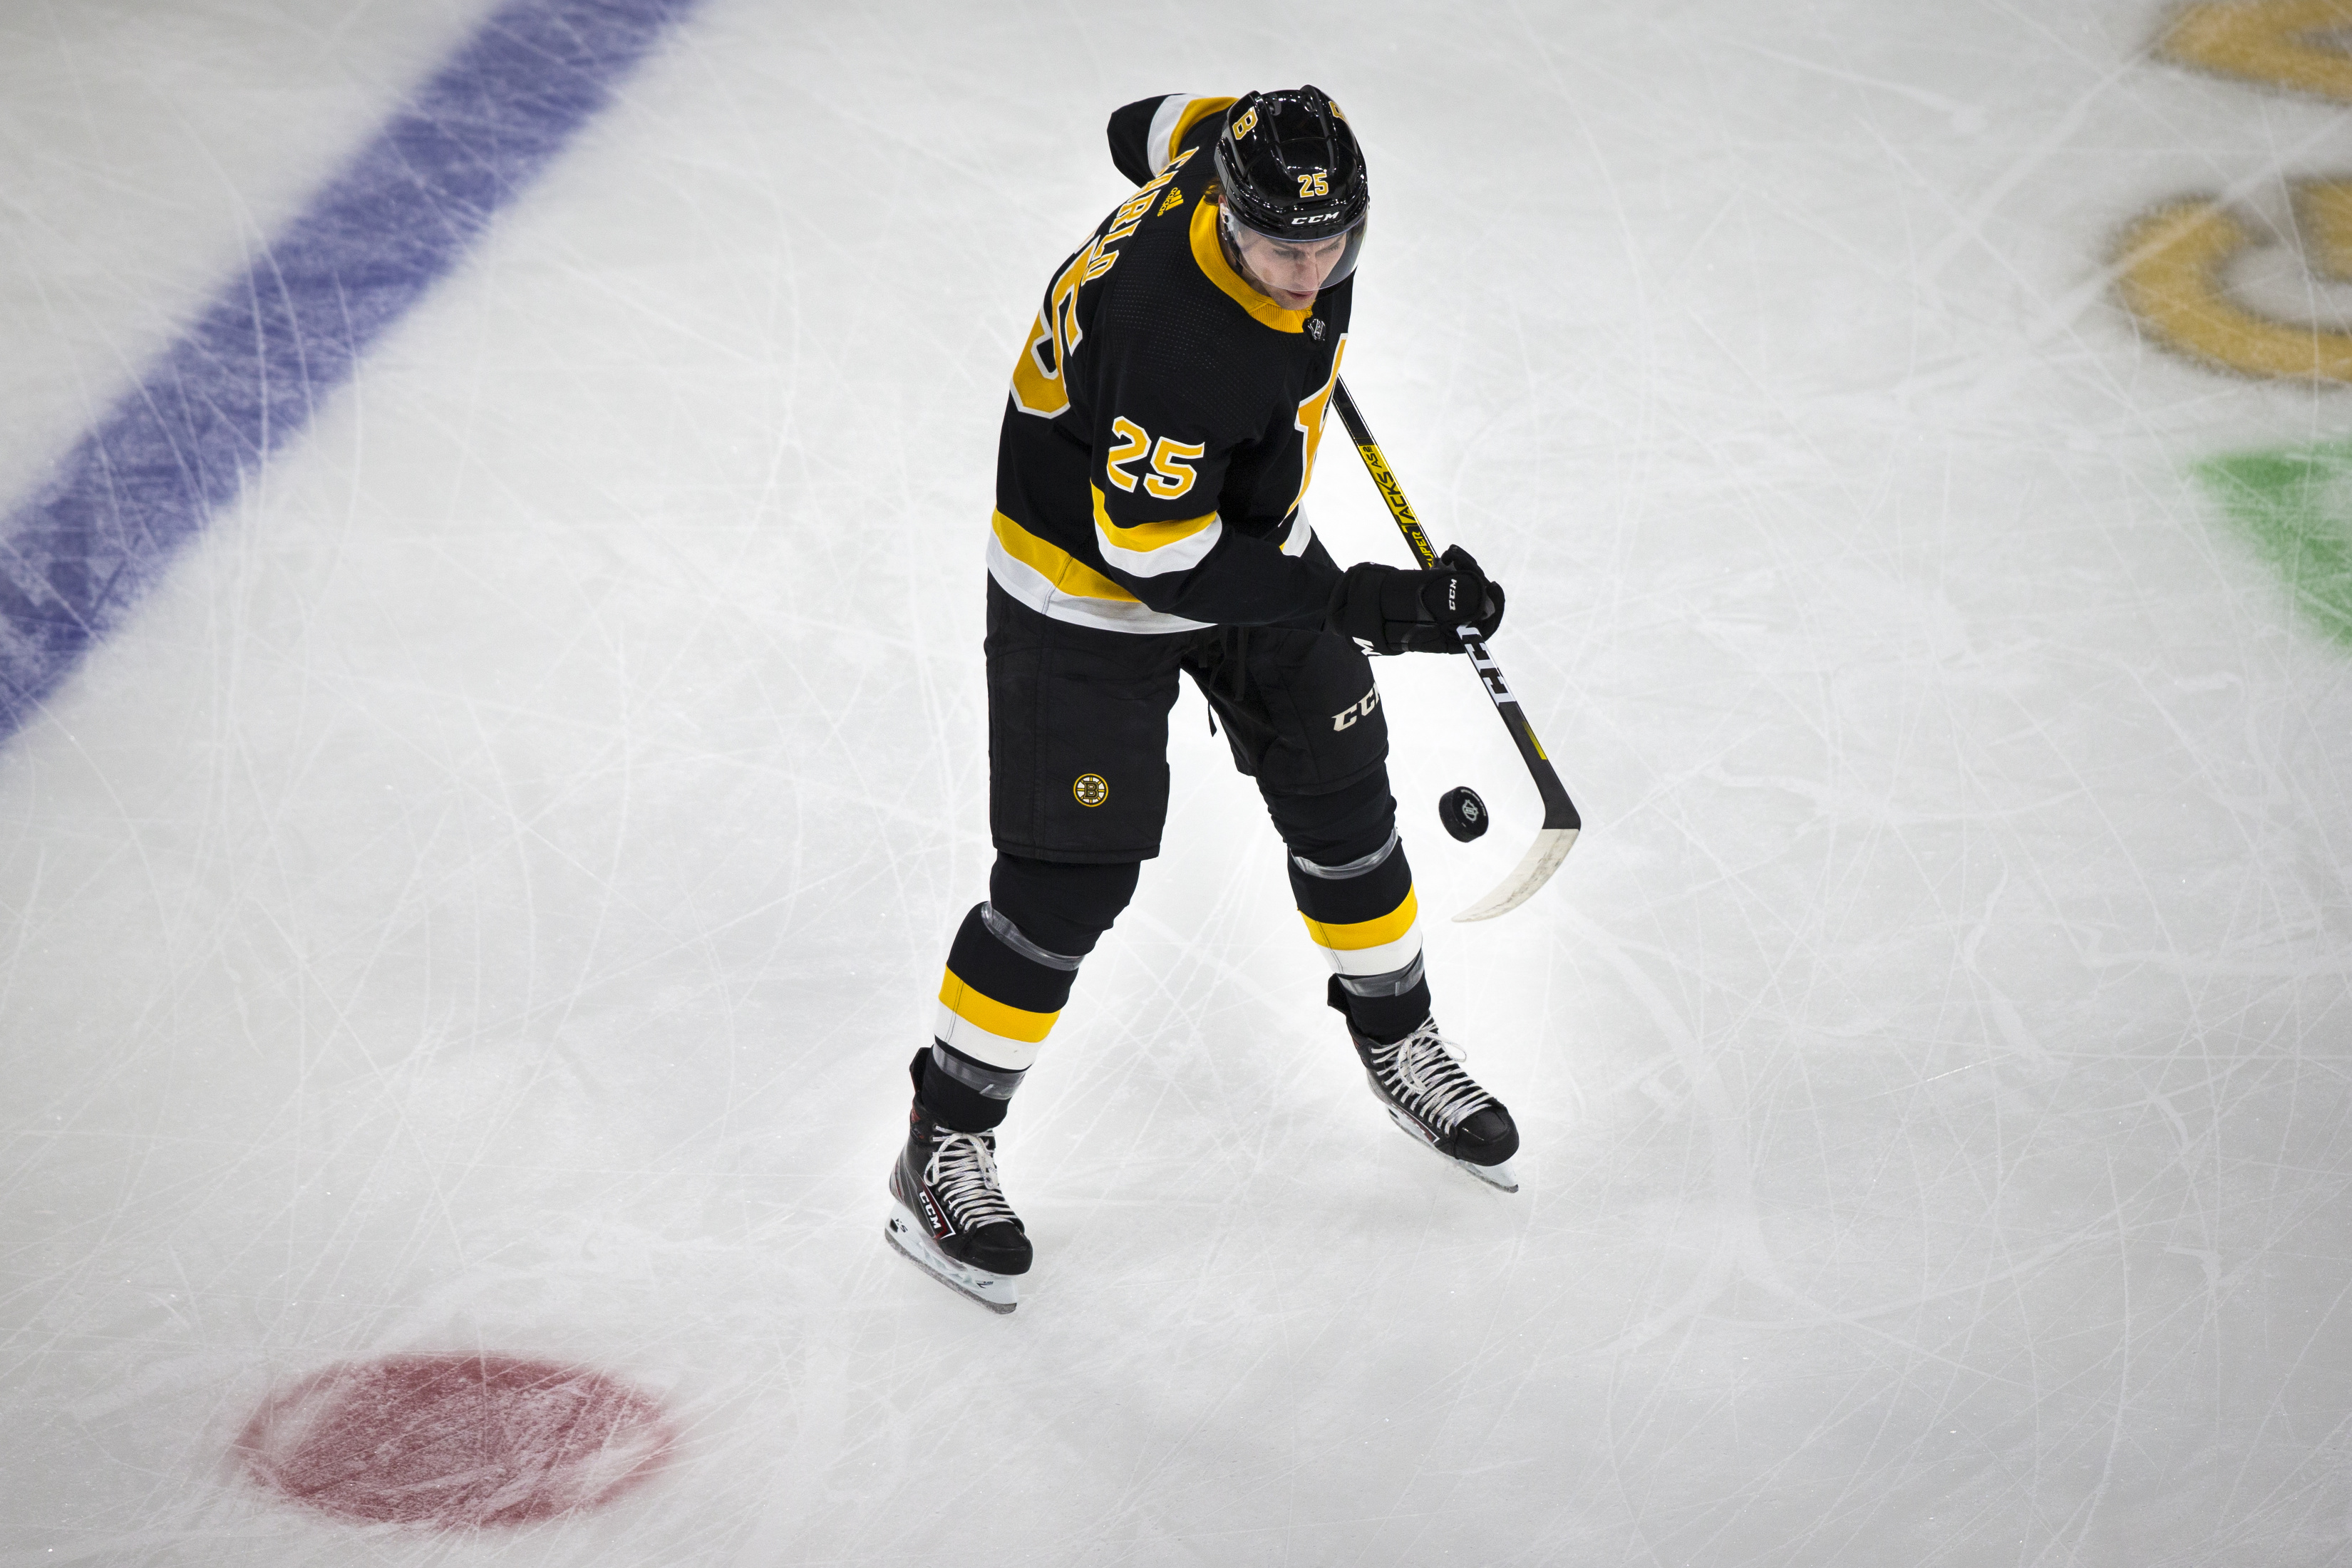 Brandon Carlo signs six-year extension with Bruins, Miller retires